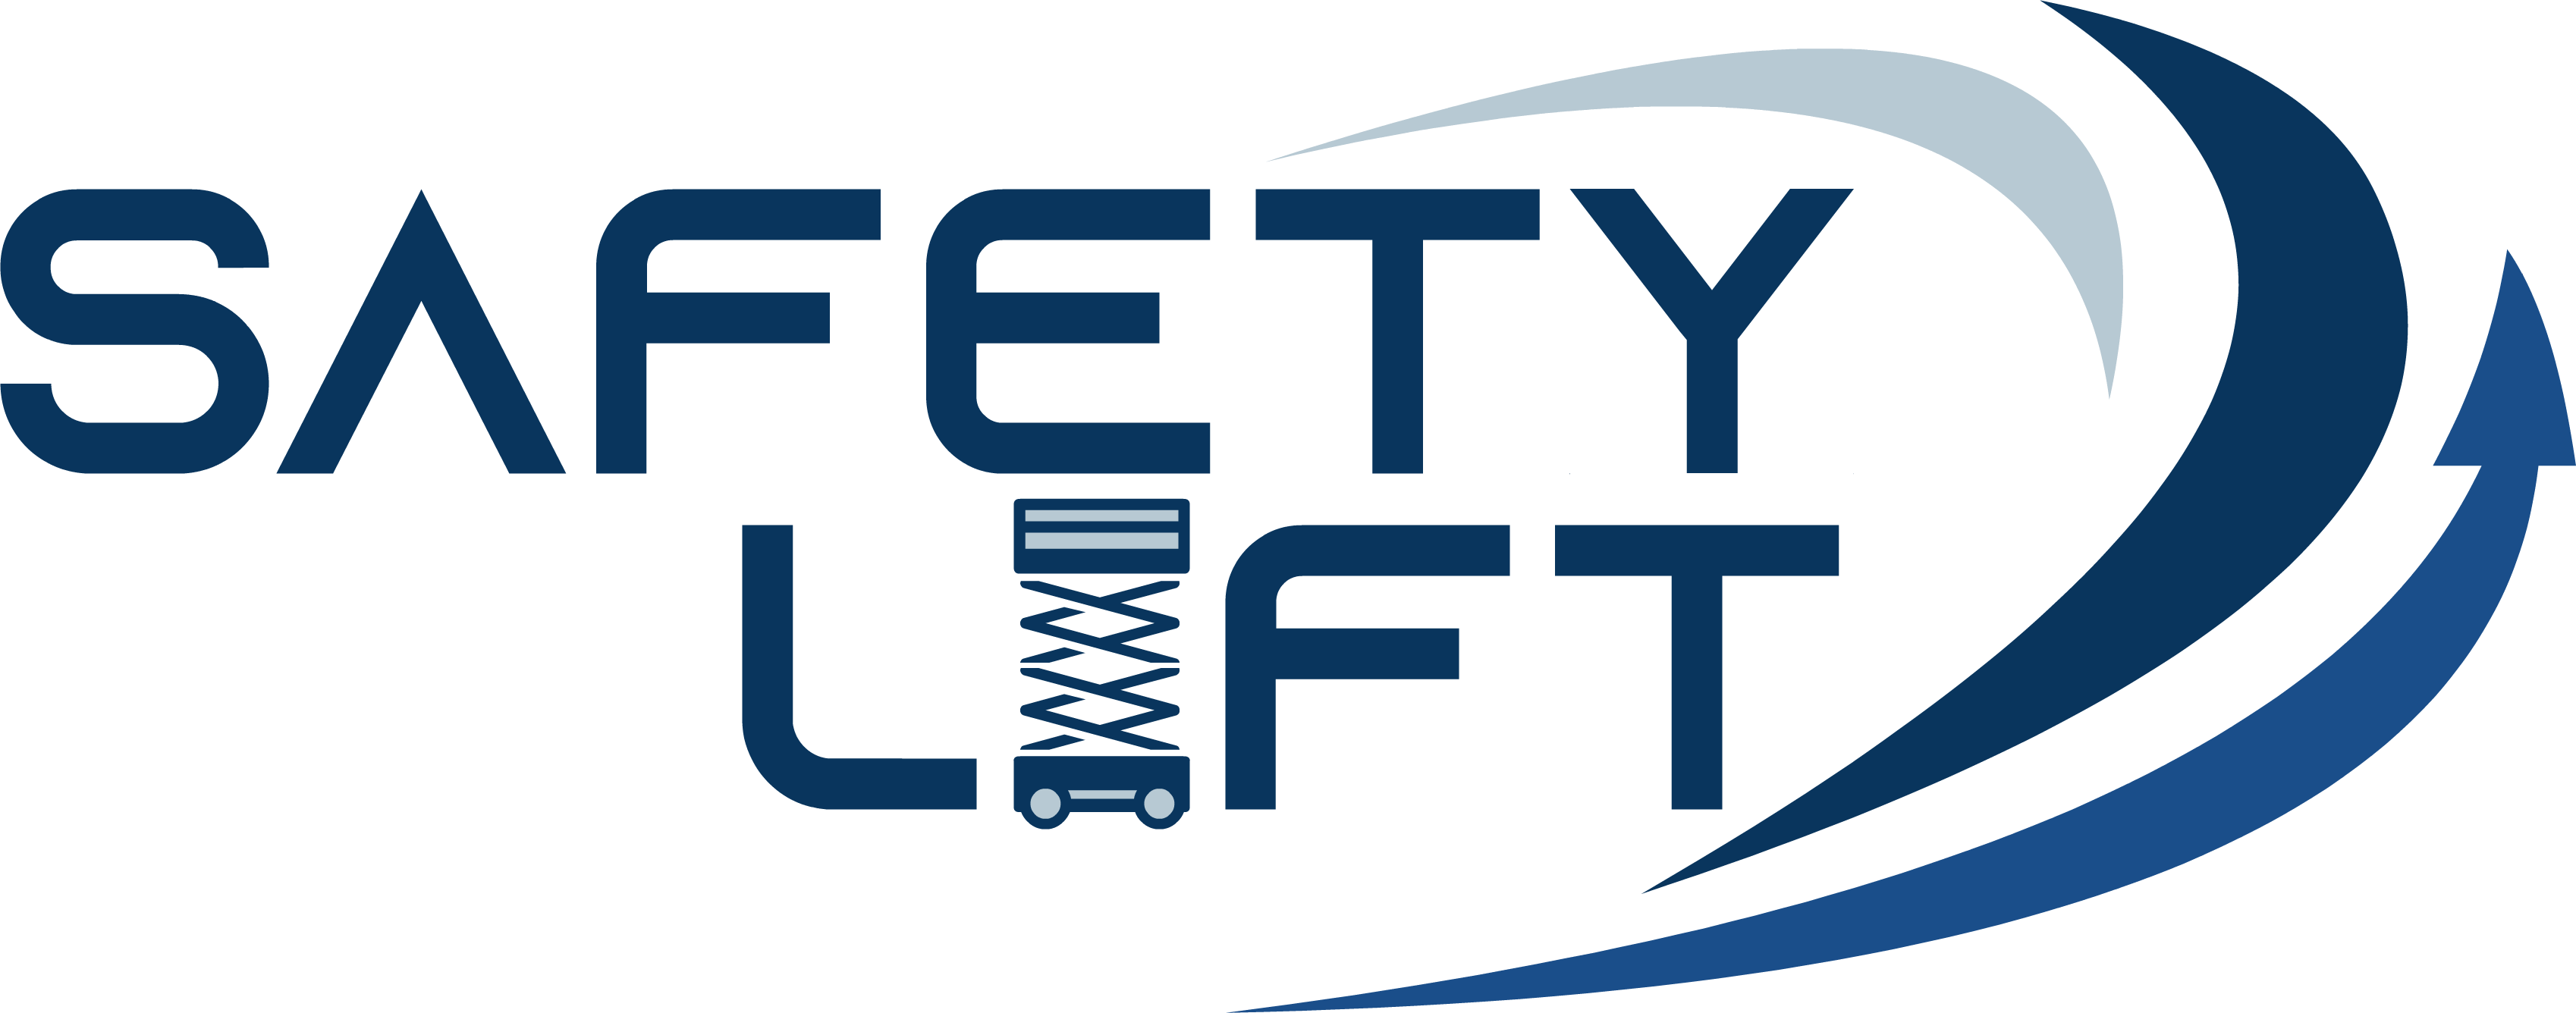 Safety Lift